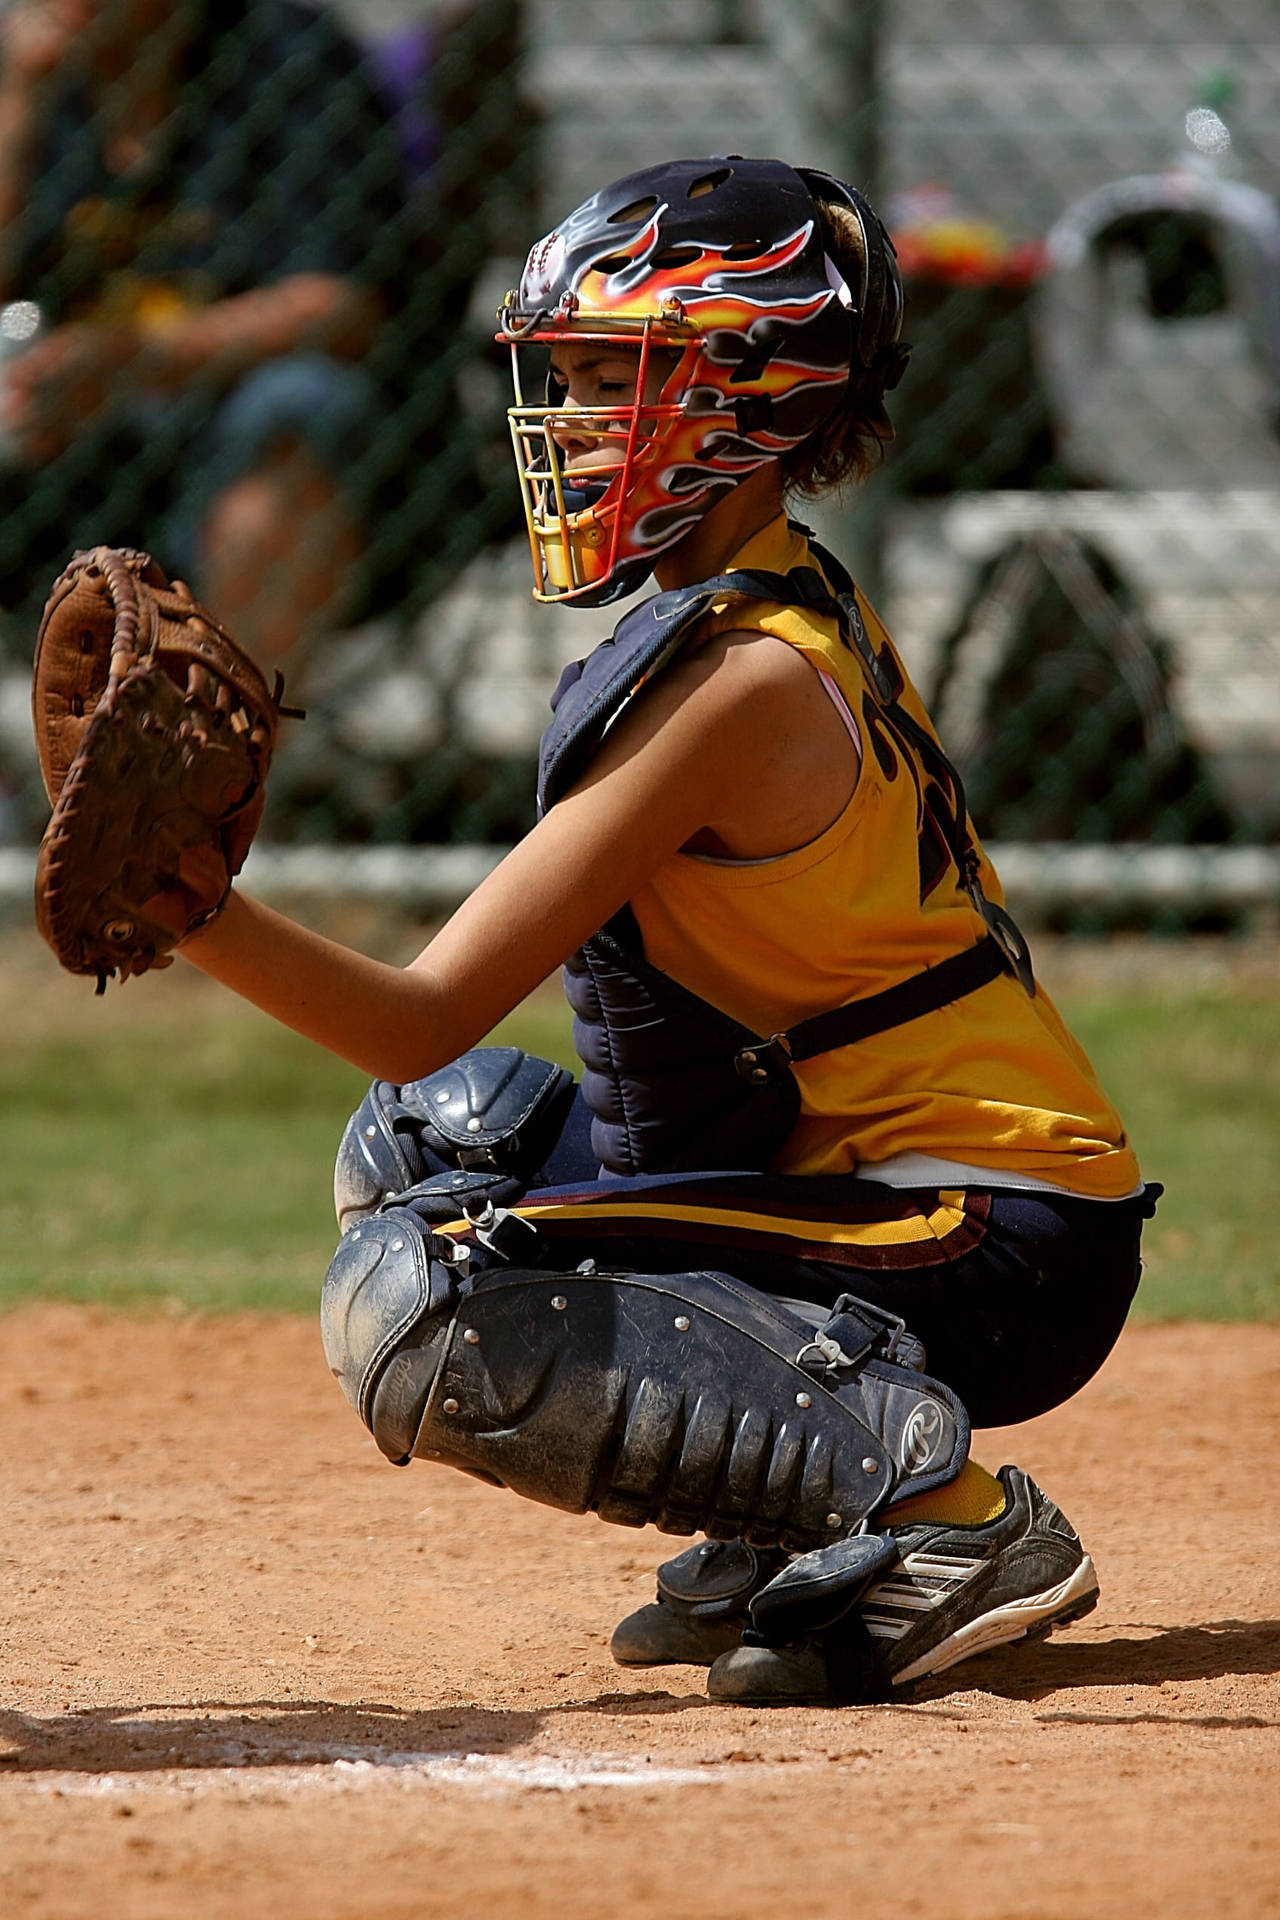 Download Softball Player Wearing Chest Protector Wallpaper 